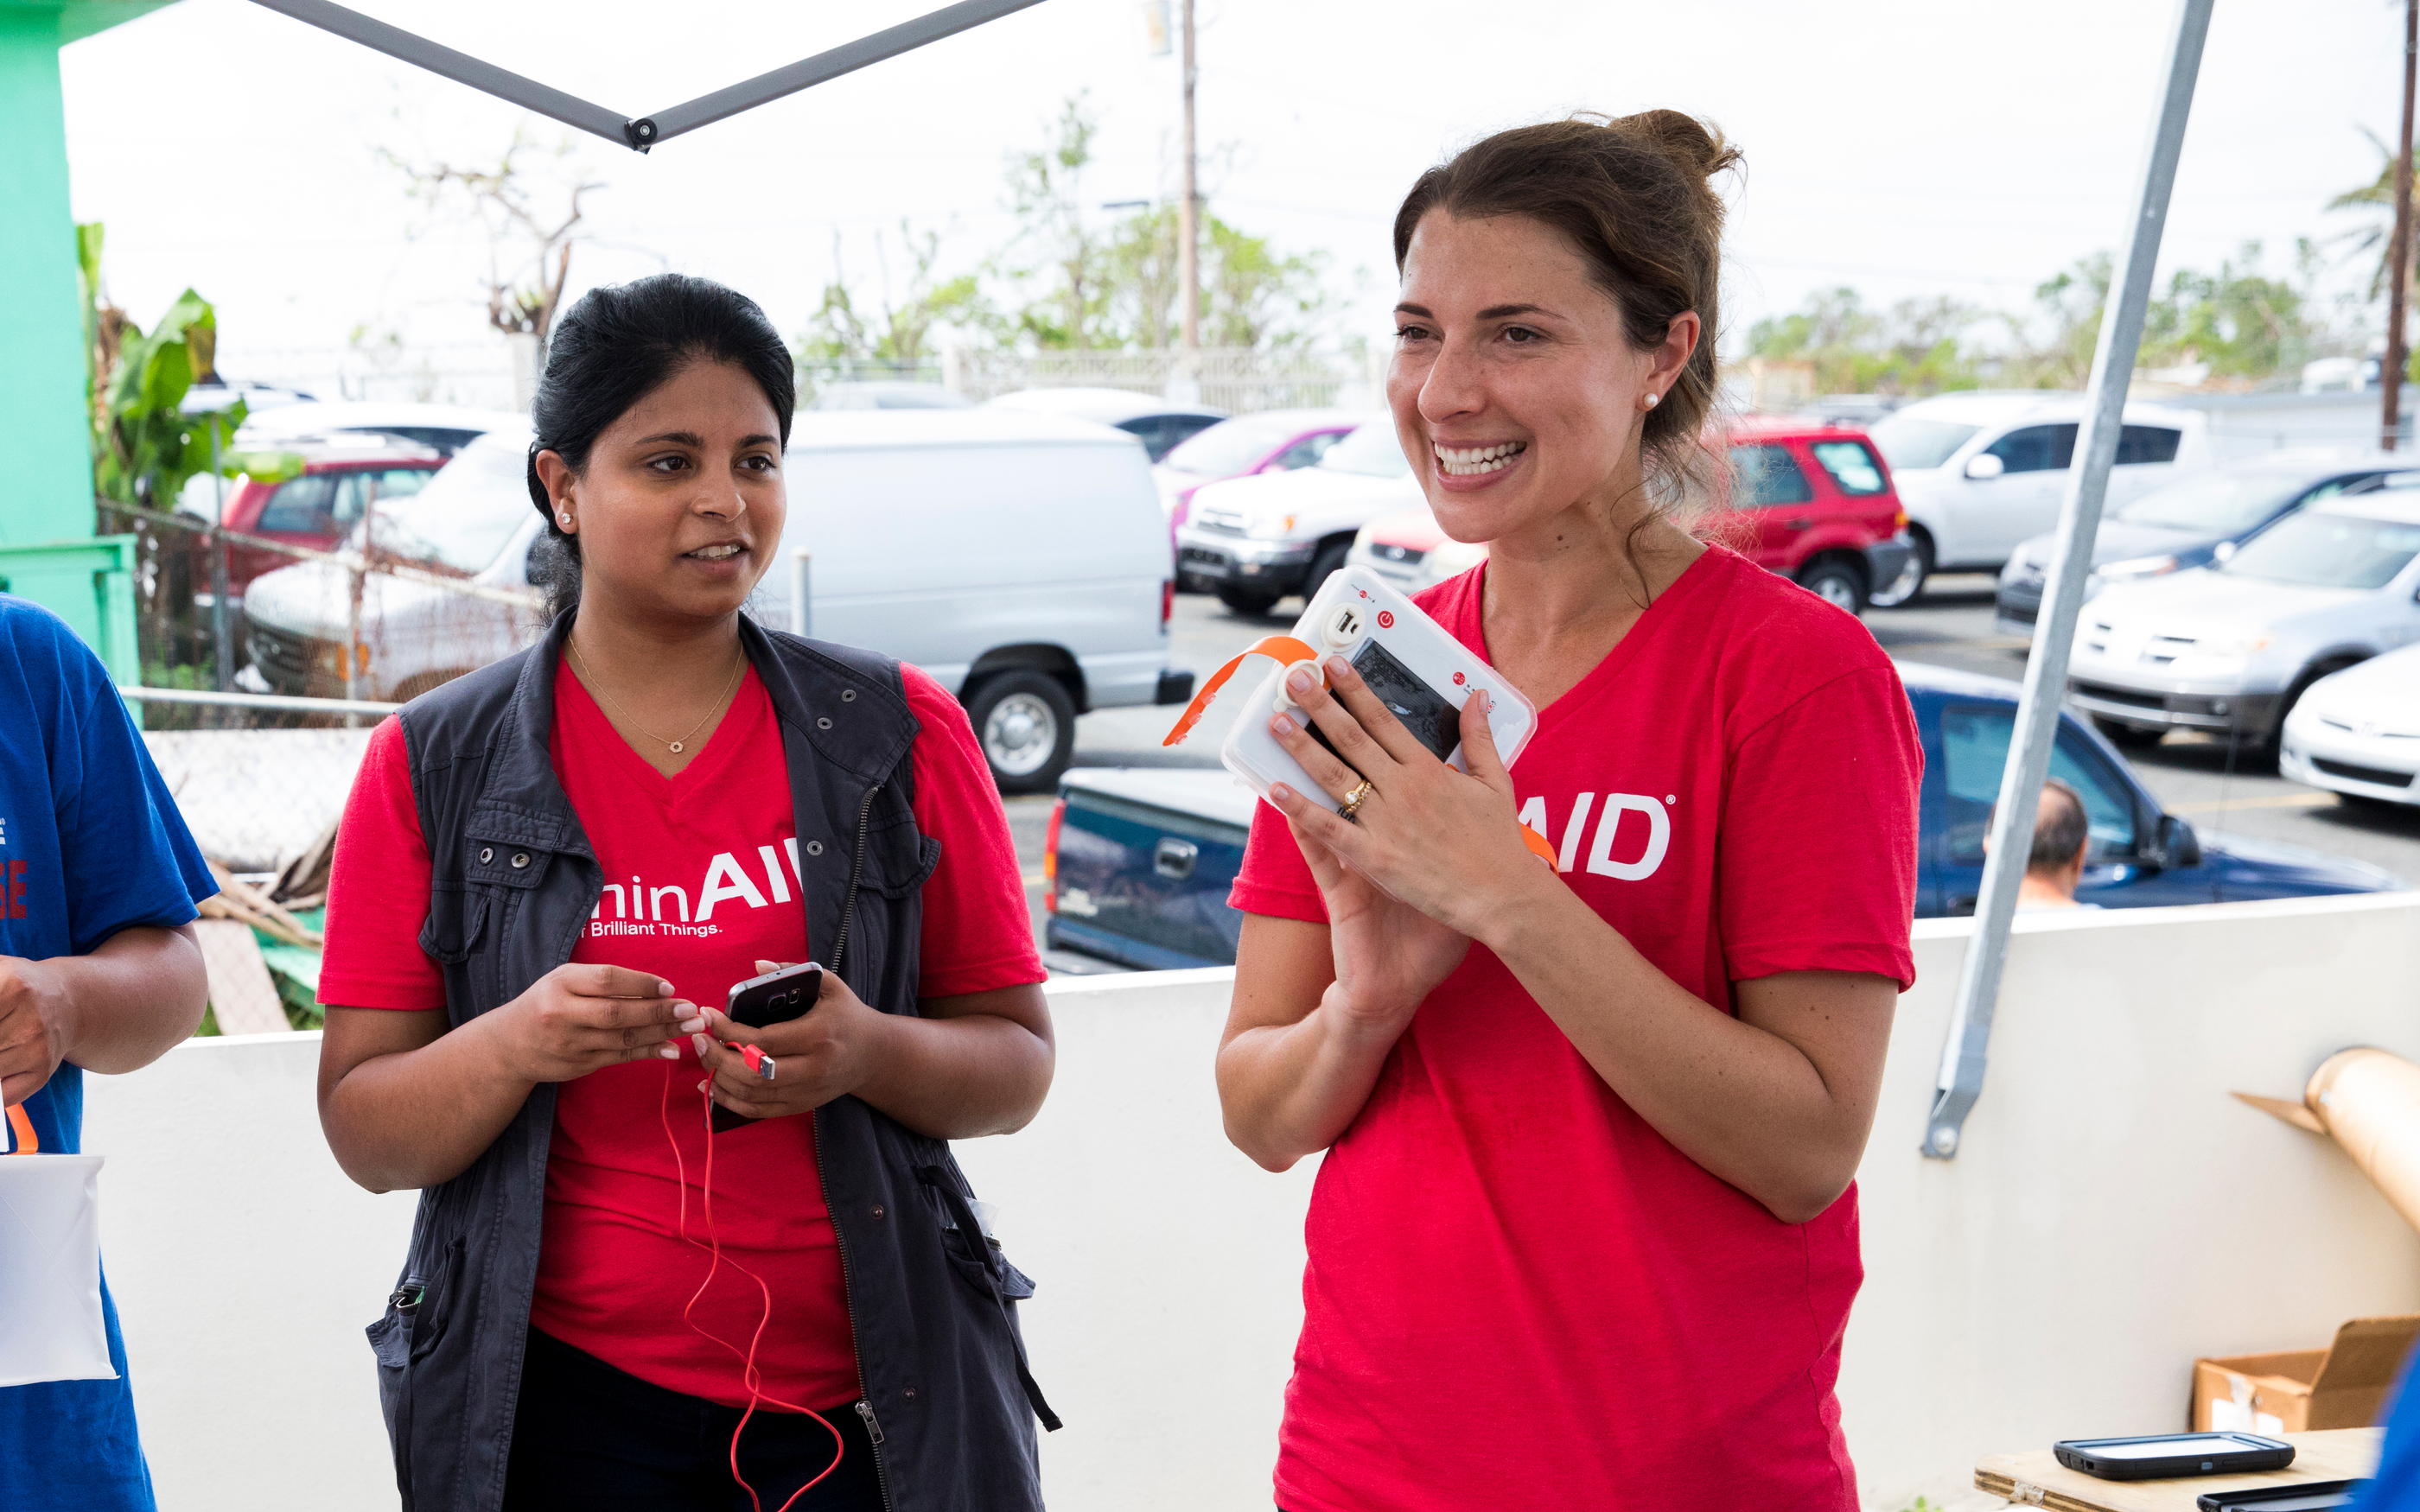 Andrea and Anna handing out LuminAID lights after a natural disaster.